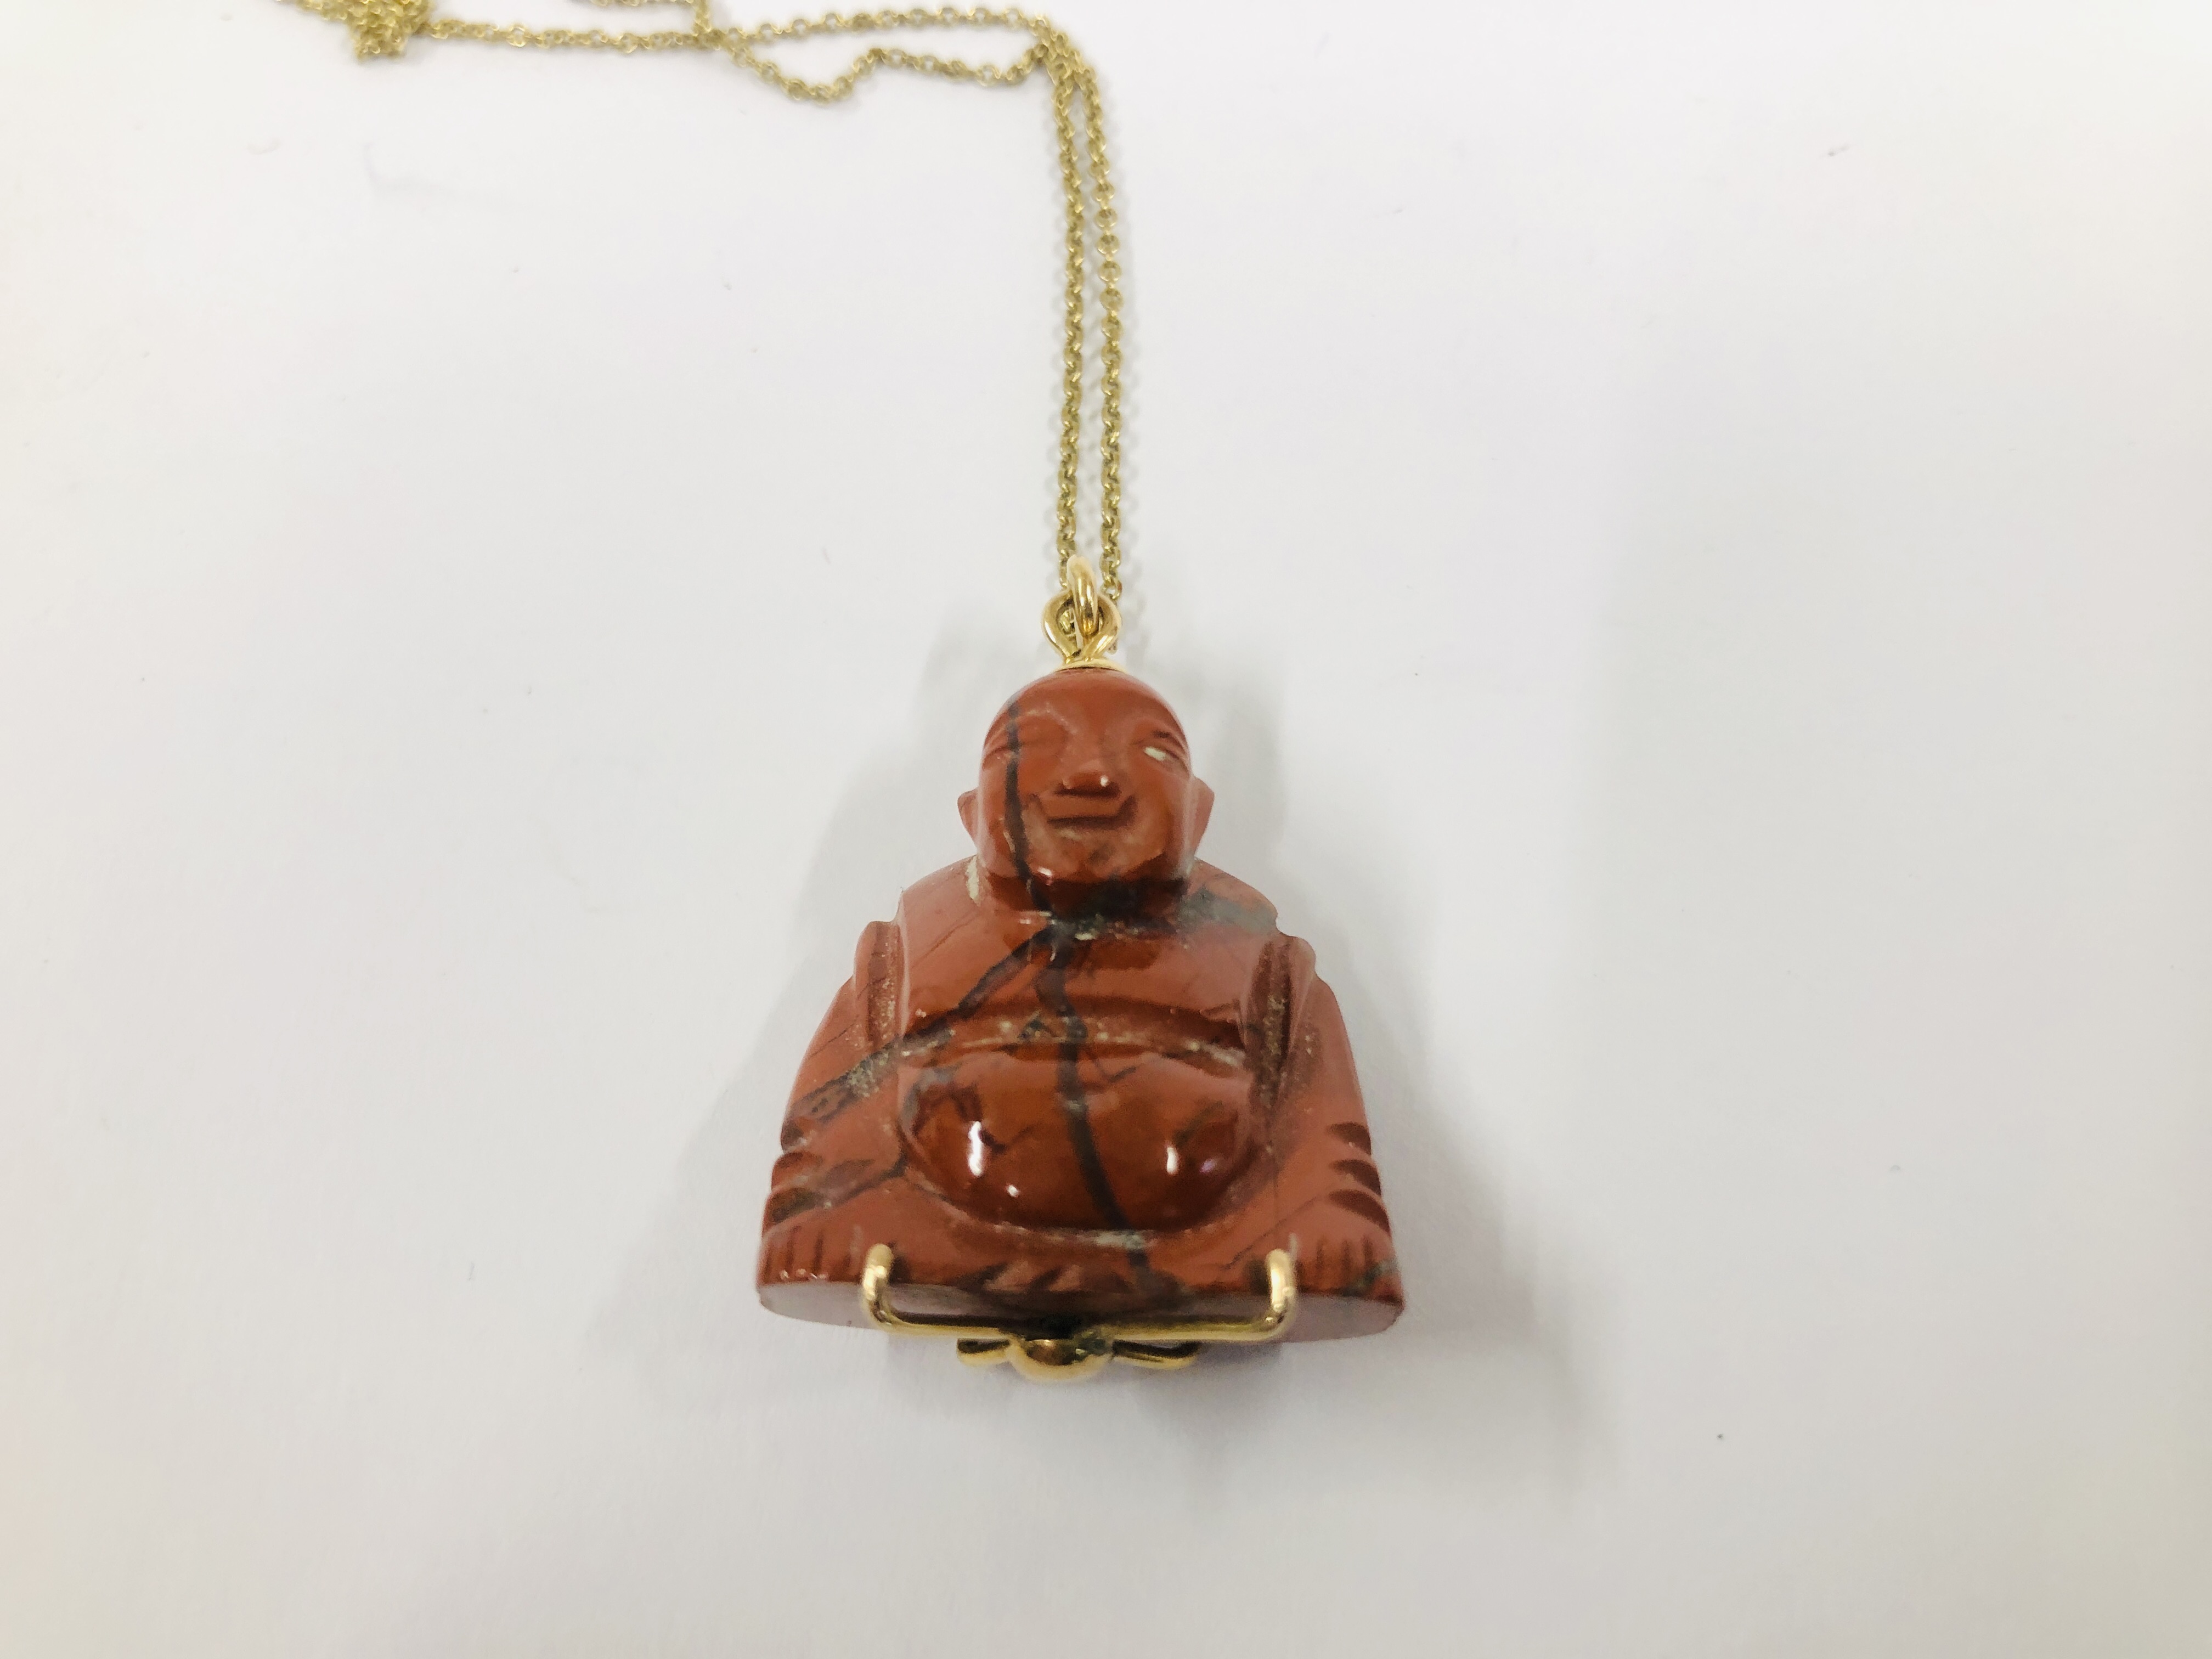 A JADE PENDANT MARKED 585 TO THE BACK ALONG WITH BUDDHA PENDANT. - Image 8 of 15